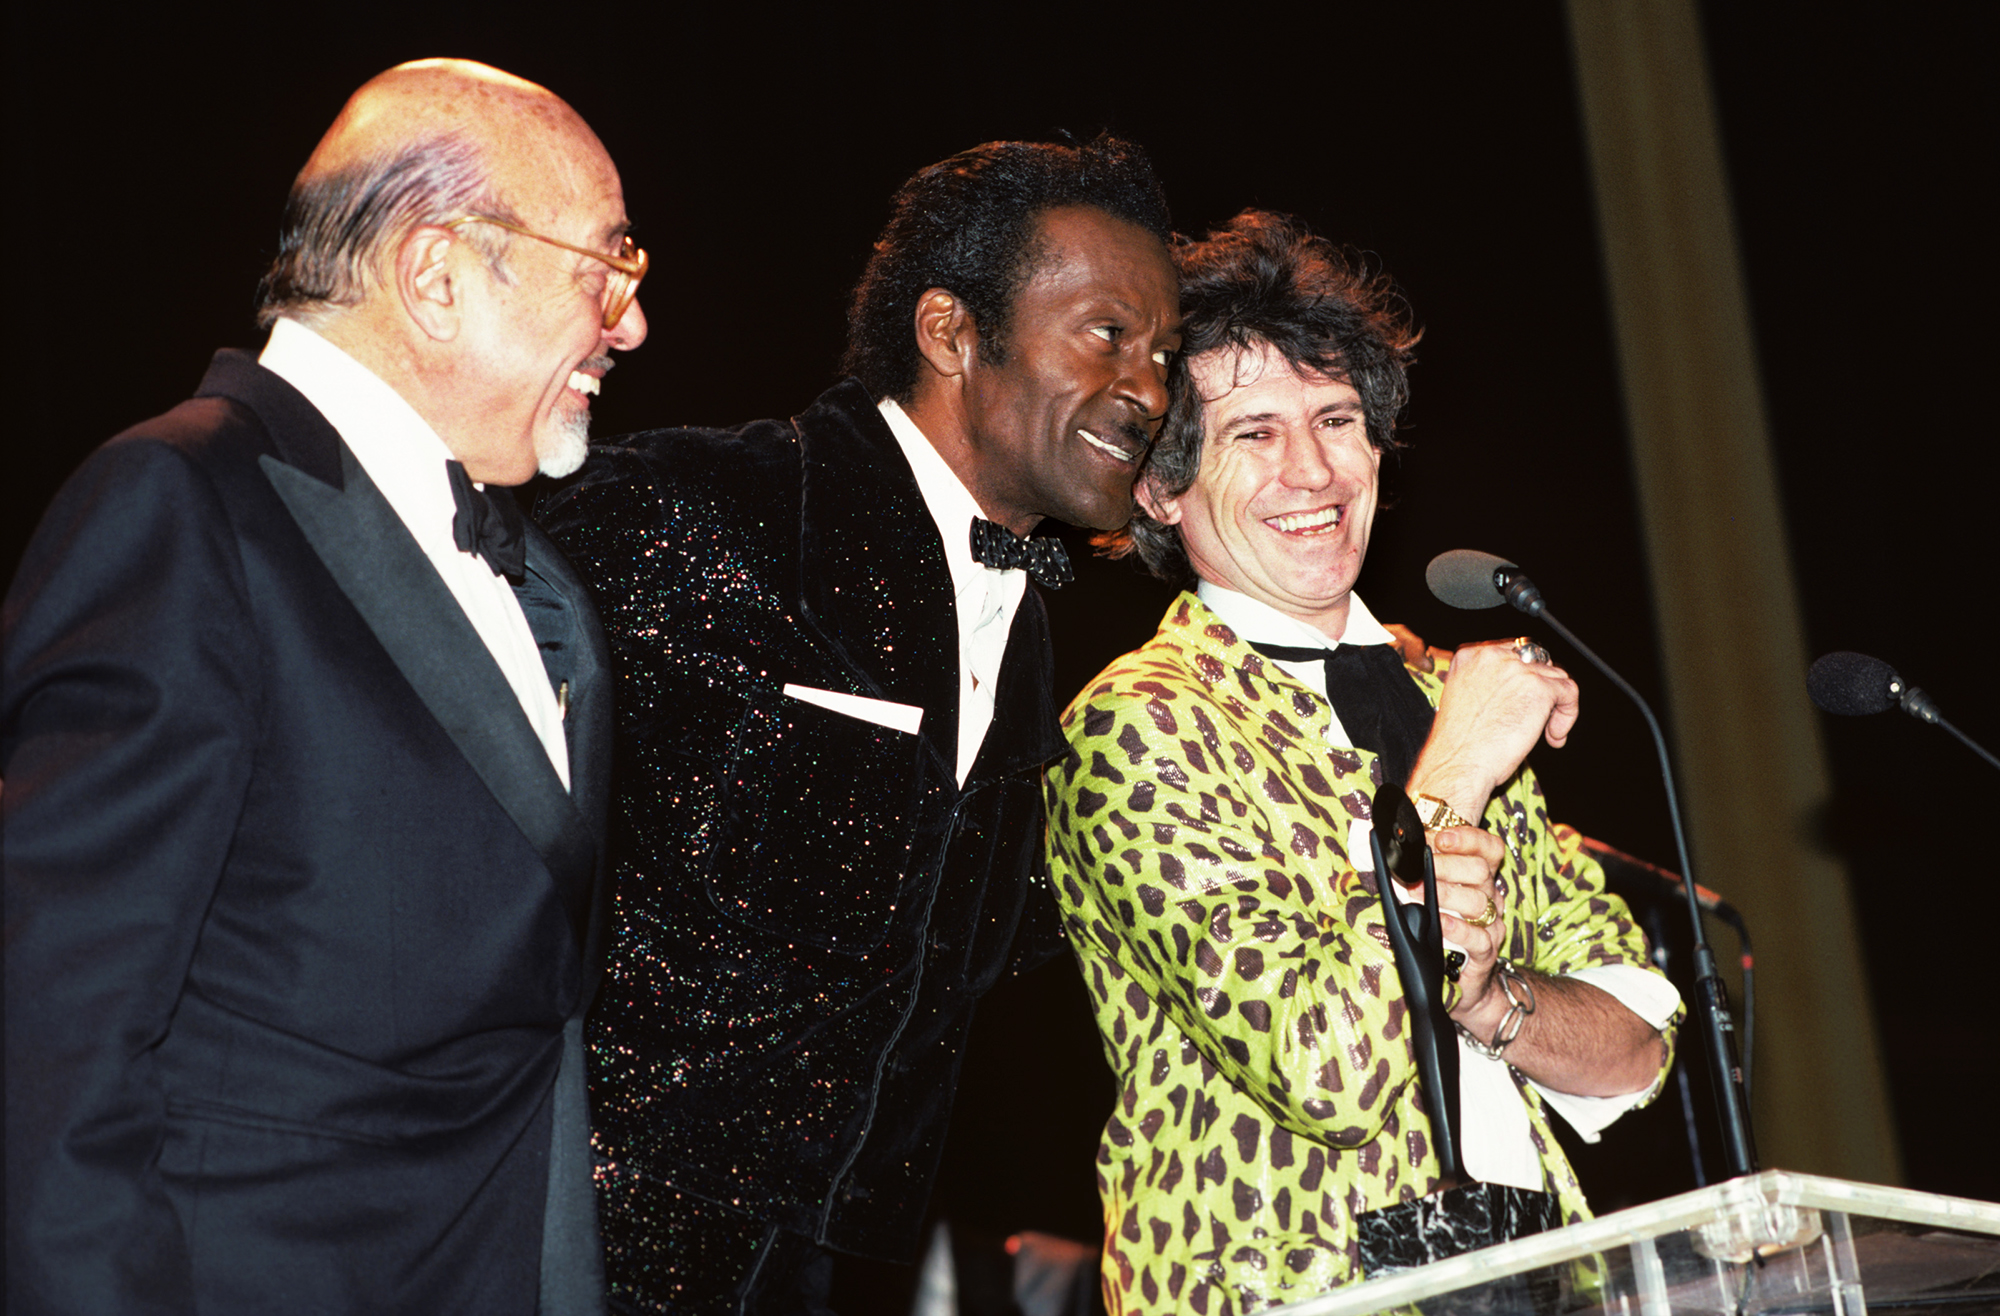 From left: Ahmet Ertegun, Chuck Berry and Keith Richards at the Rock and Roll Hall of Fame Awards in New York City, on Jan. 23, 1986.